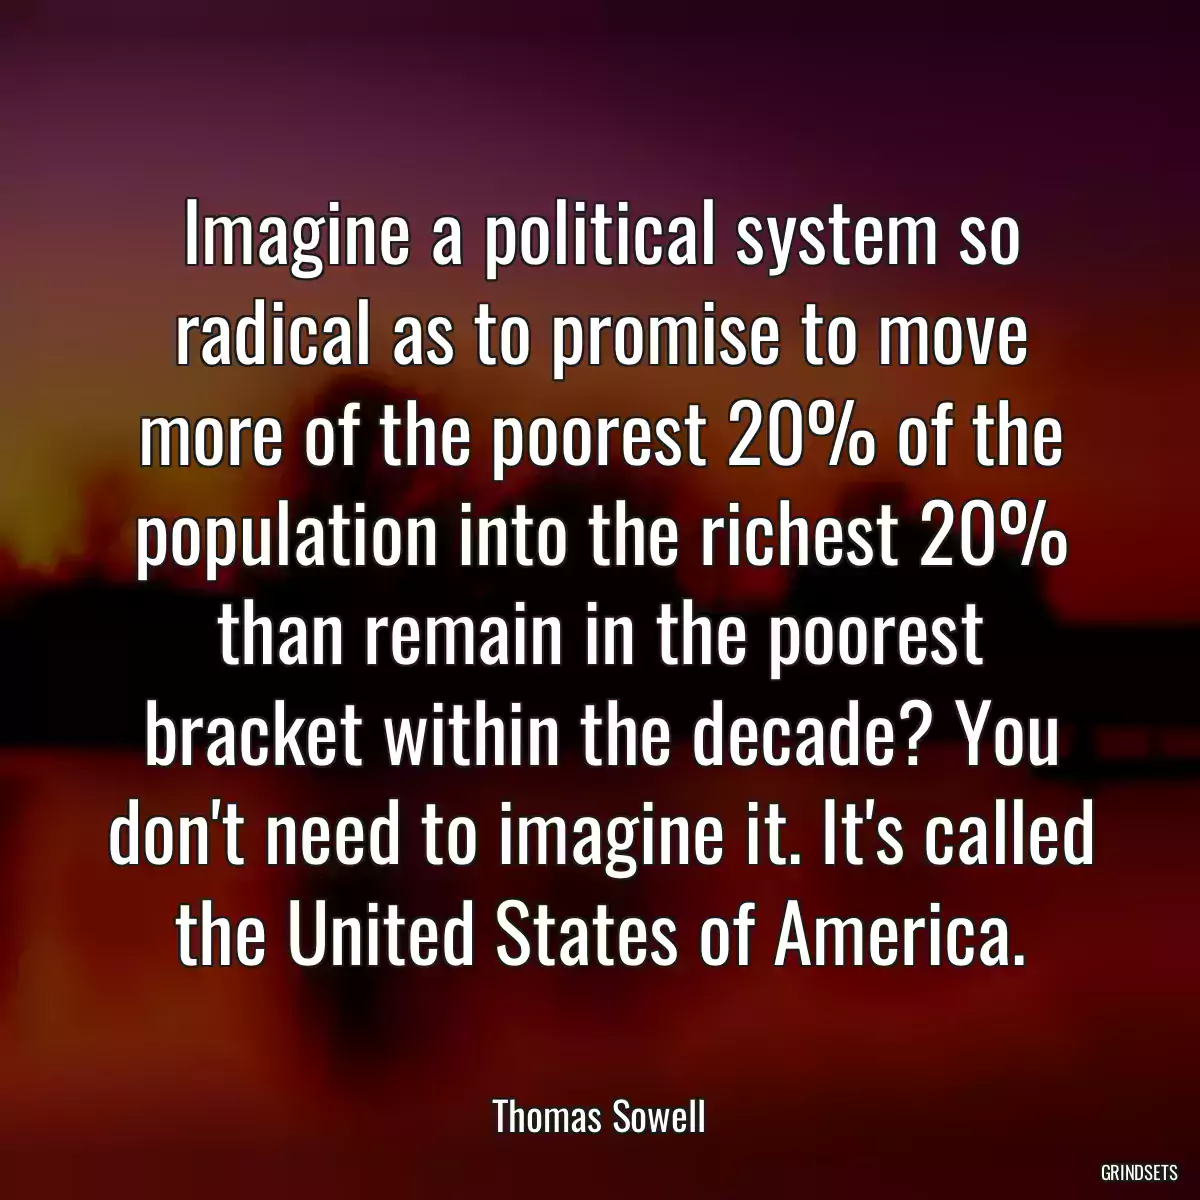 Imagine a political system so radical as to promise to move more of the poorest 20% of the population into the richest 20% than remain in the poorest bracket within the decade? You don\'t need to imagine it. It\'s called the United States of America.